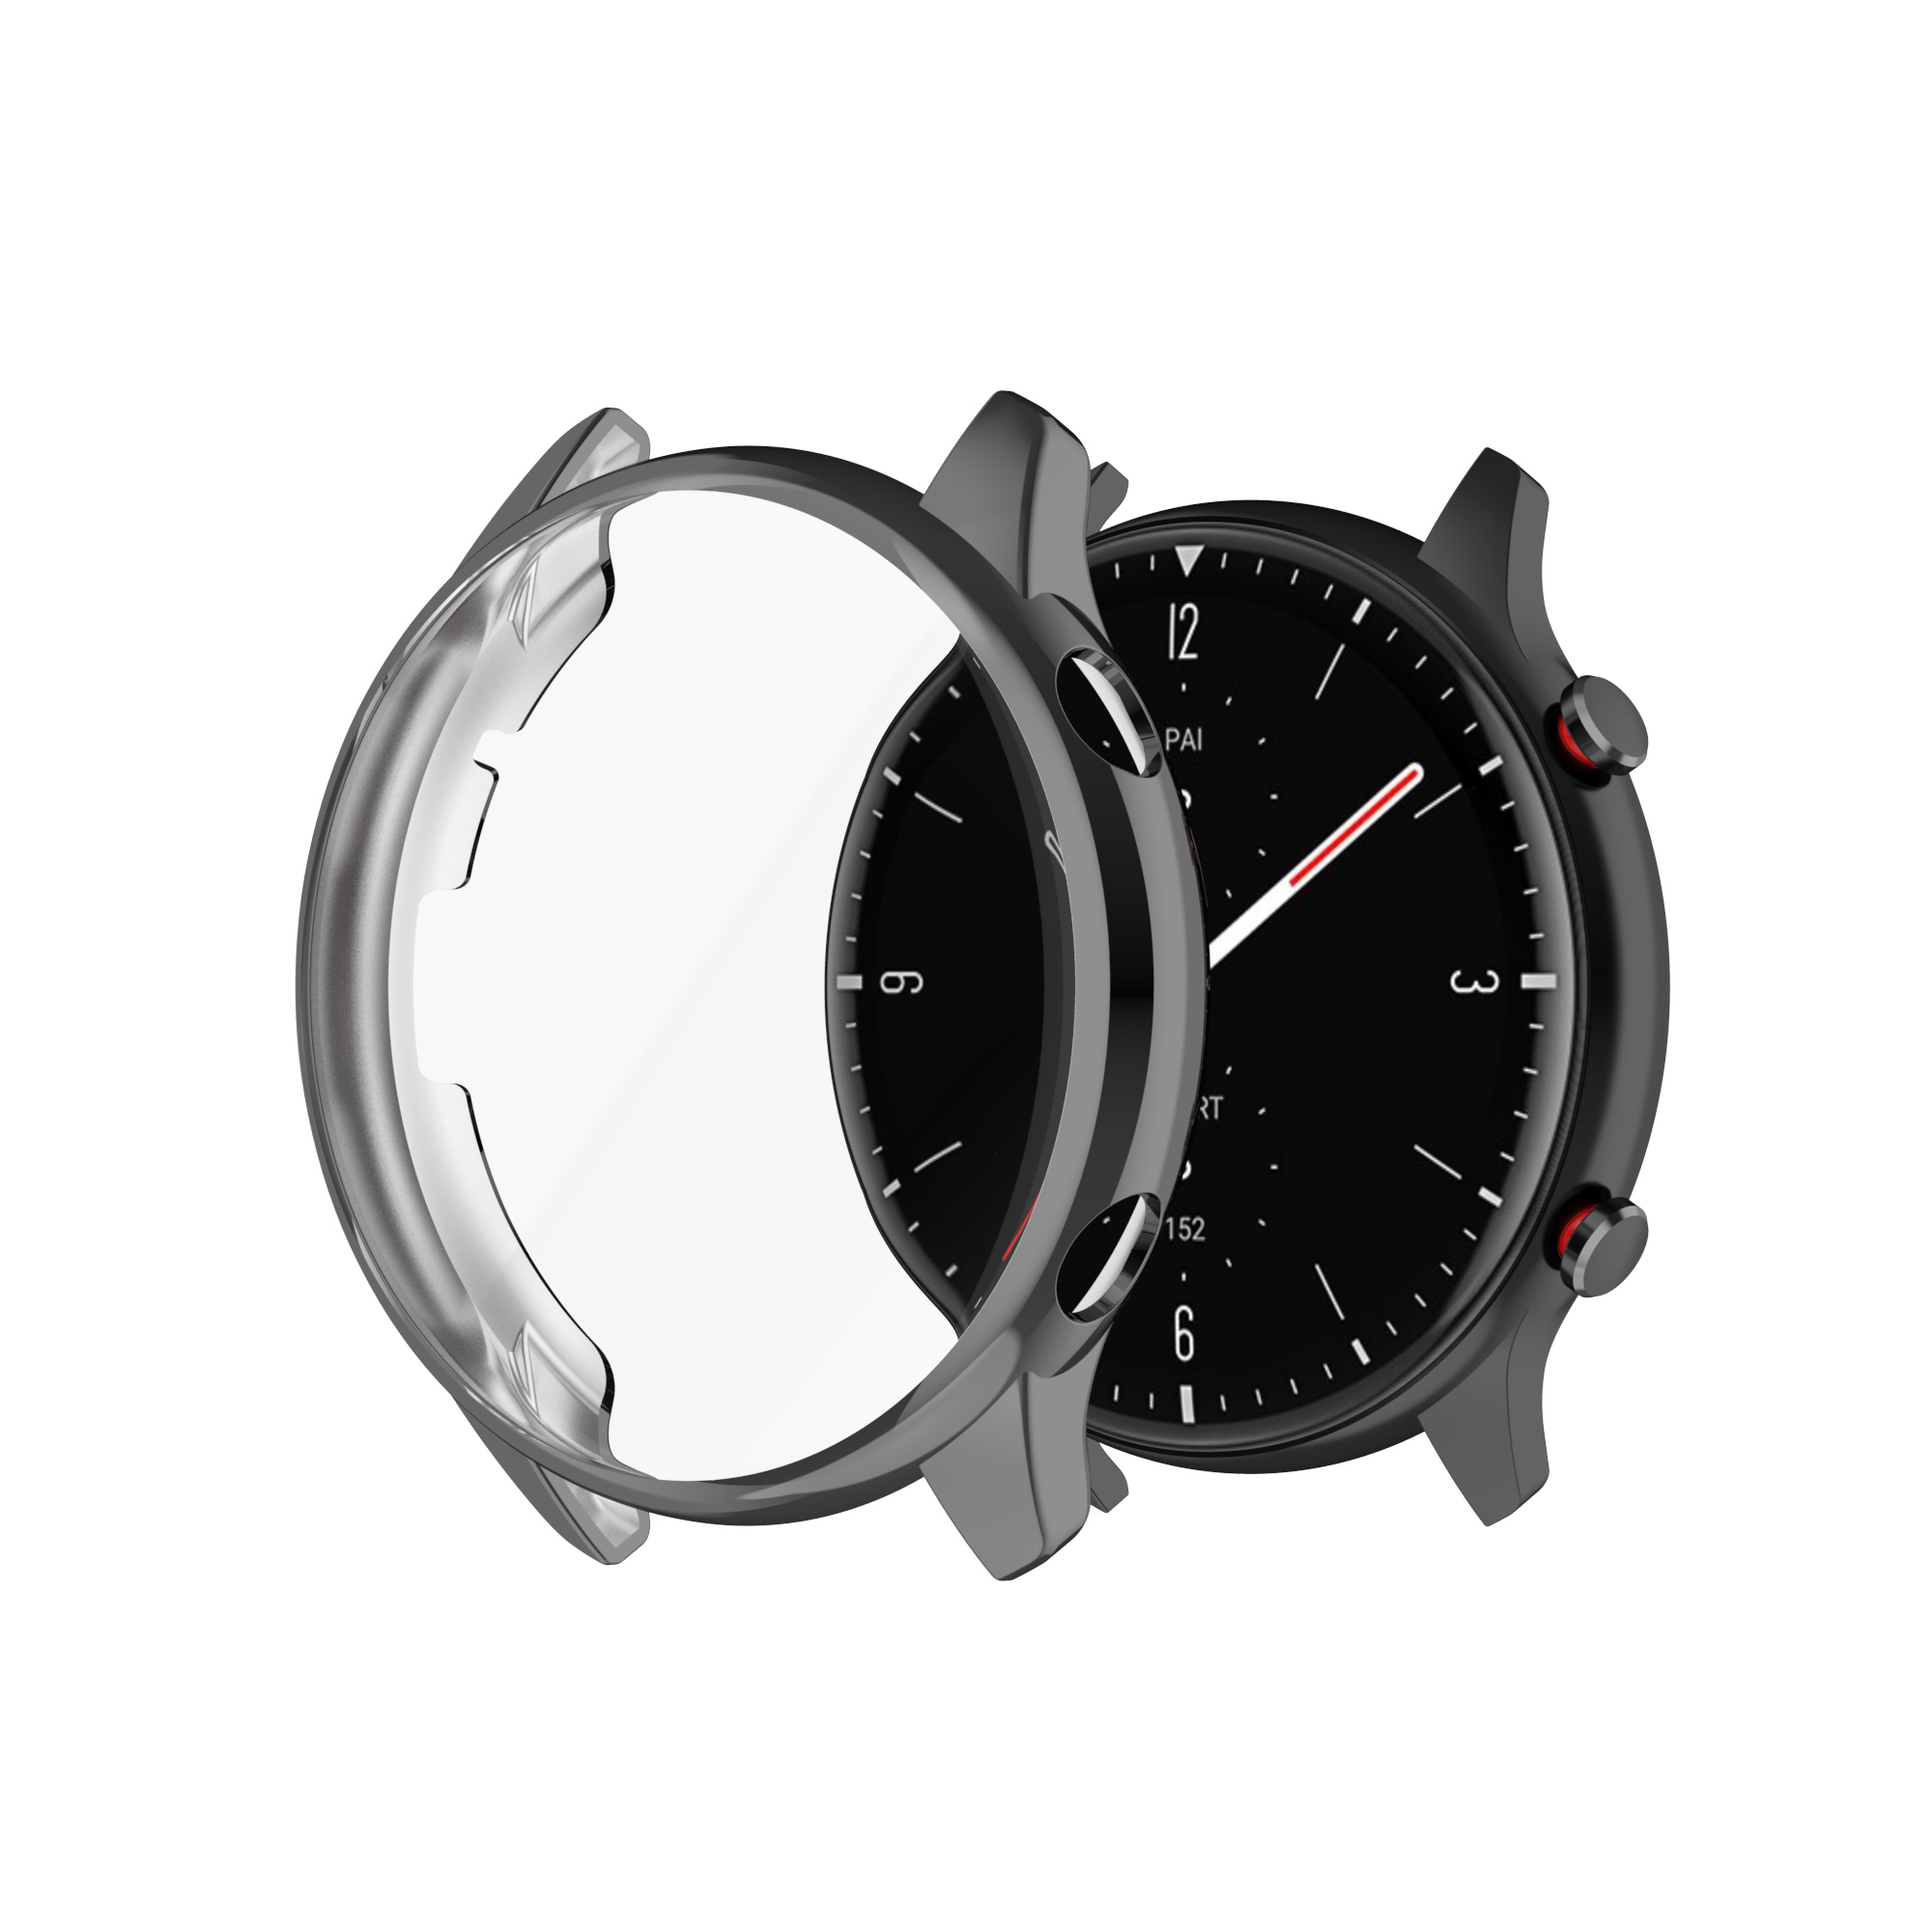 Find Bakeey TPU All inclusive Watch Case Cover Watch Sheel Protector For Amazfit GTR 2E/Amazfit GTR 2 for Sale on Gipsybee.com with cryptocurrencies